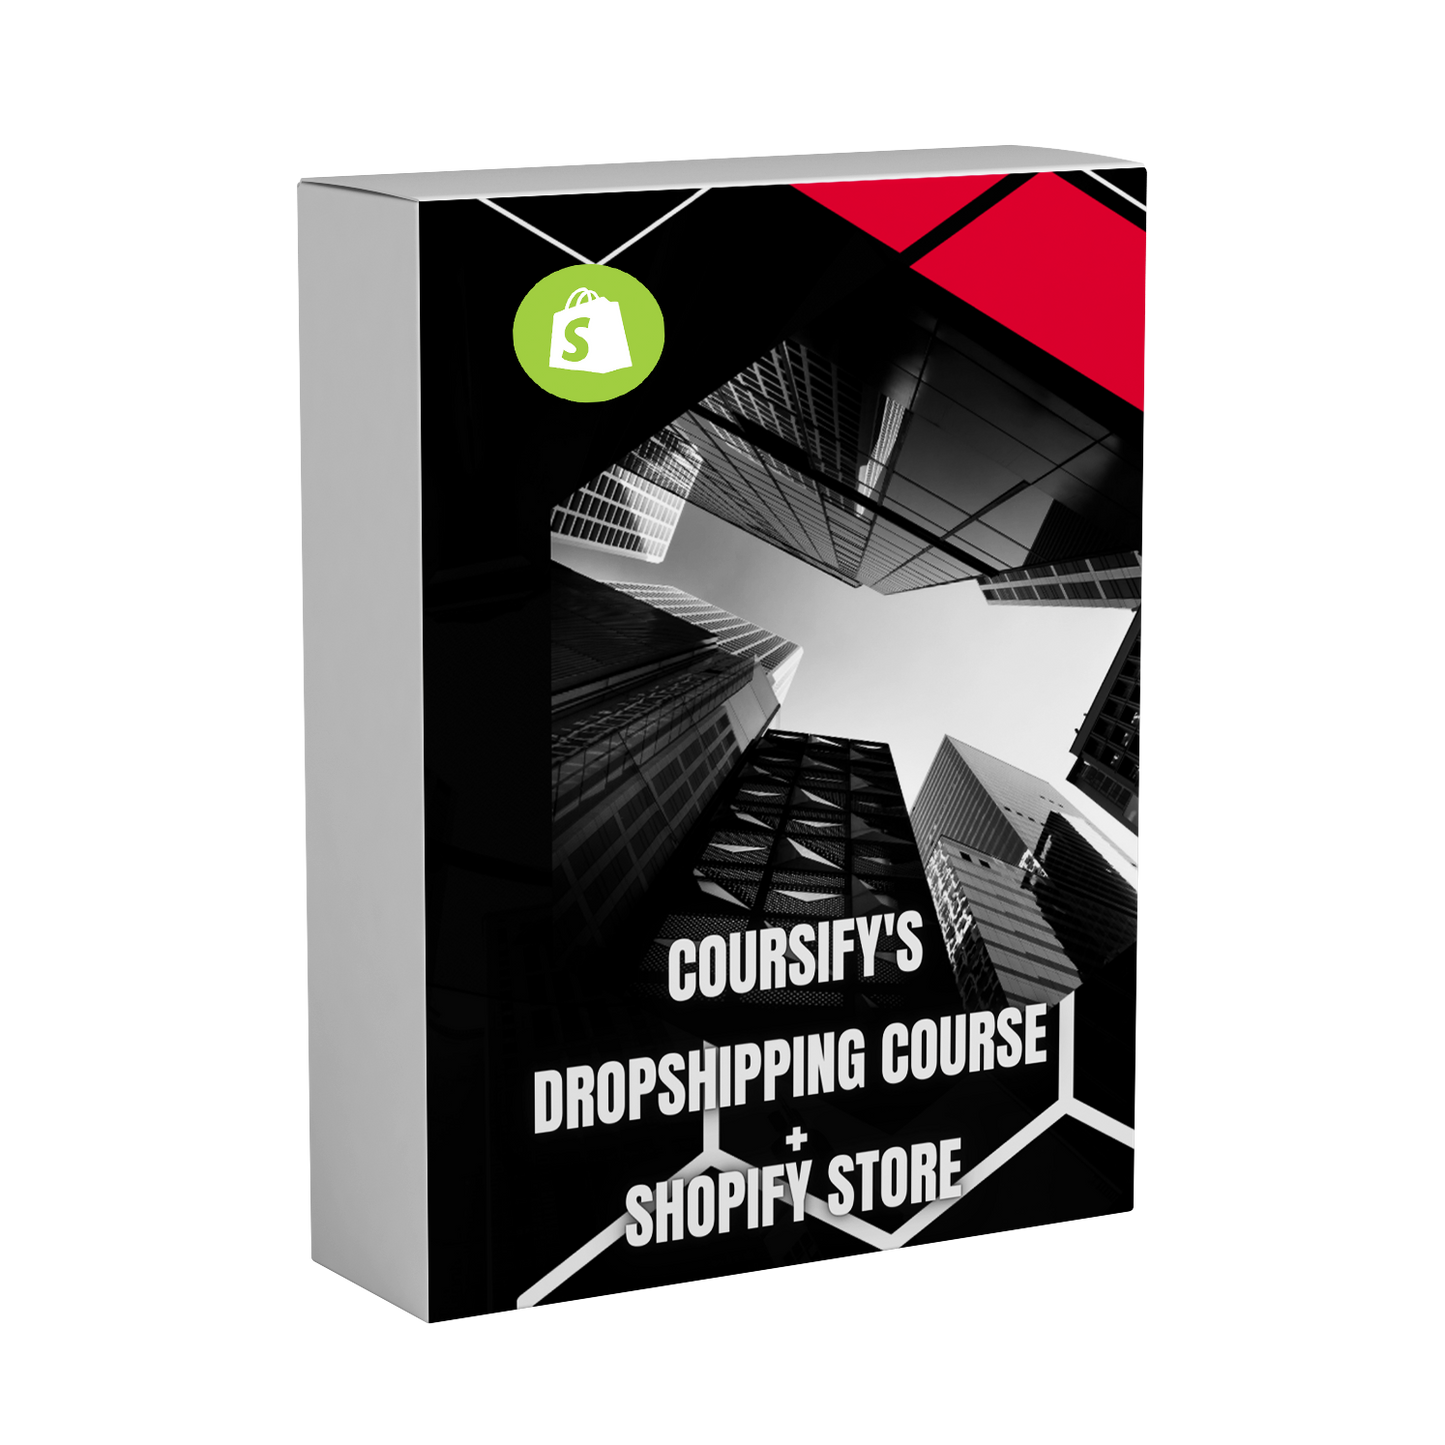 Coursify's Dropshipping Course + Shopify Store